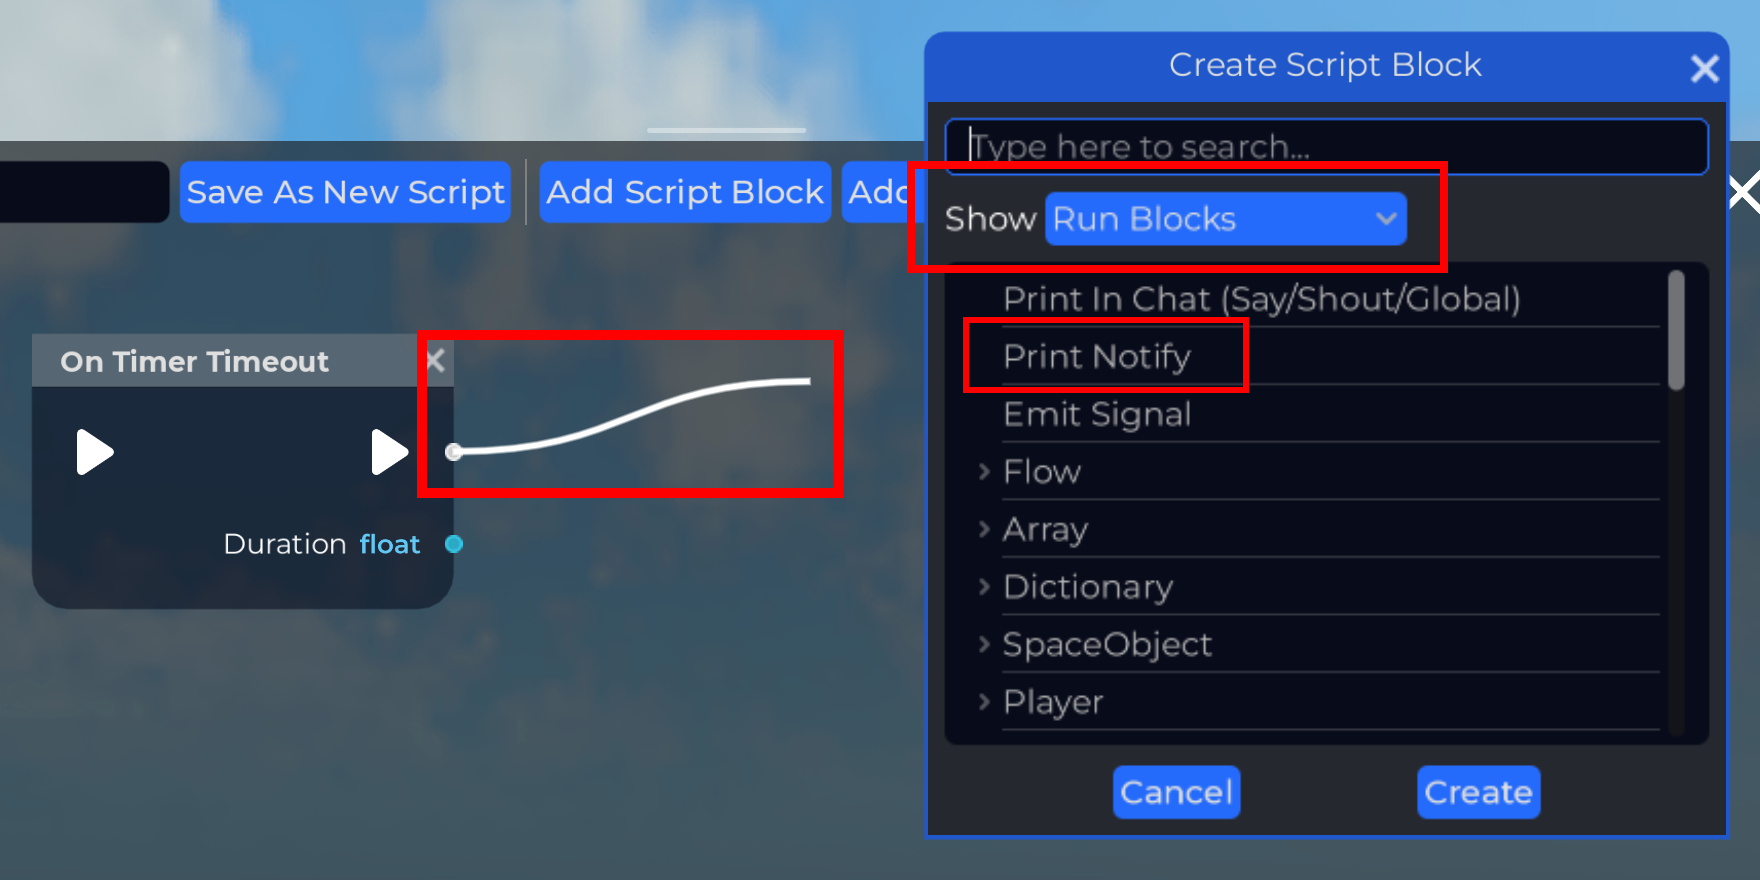 Create Script Block dialog after dragging from a block